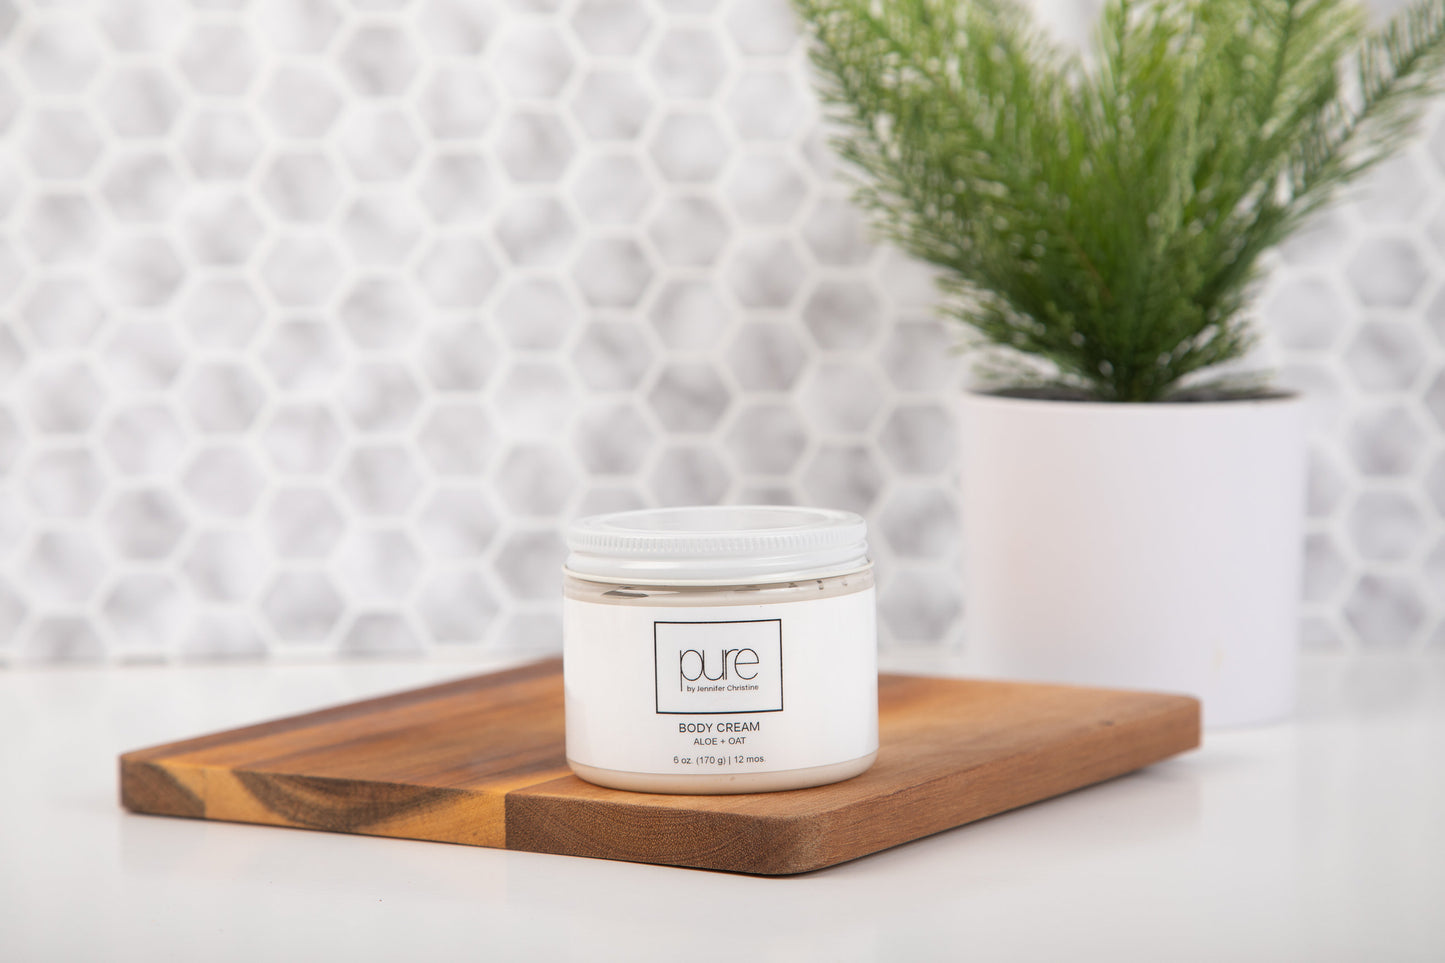 Our Aloe + Oat Body Cream is a rich moisturizer that was formulated with extremely dry skin in mind.  Colloidal Oats and Aloe Vera soothe dryness, Mango Butter and Cupuacu Butter improve skin hydration and Organic Calendula promote healing.  All these ingredients come together to syngertistically protect your skins natural barrier.